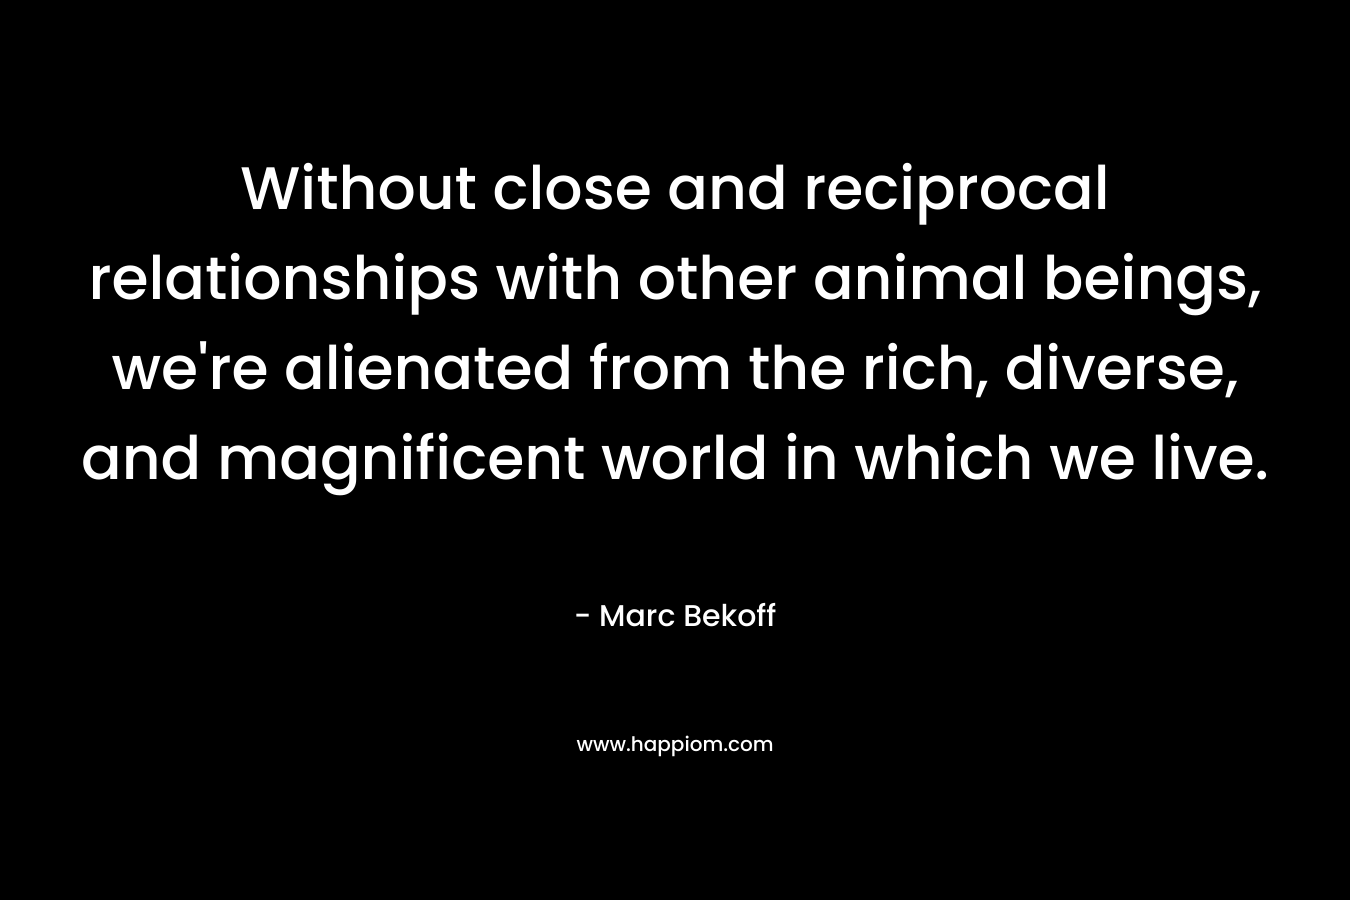 Without close and reciprocal relationships with other animal beings, we’re alienated from the rich, diverse, and magnificent world in which we live. – Marc Bekoff